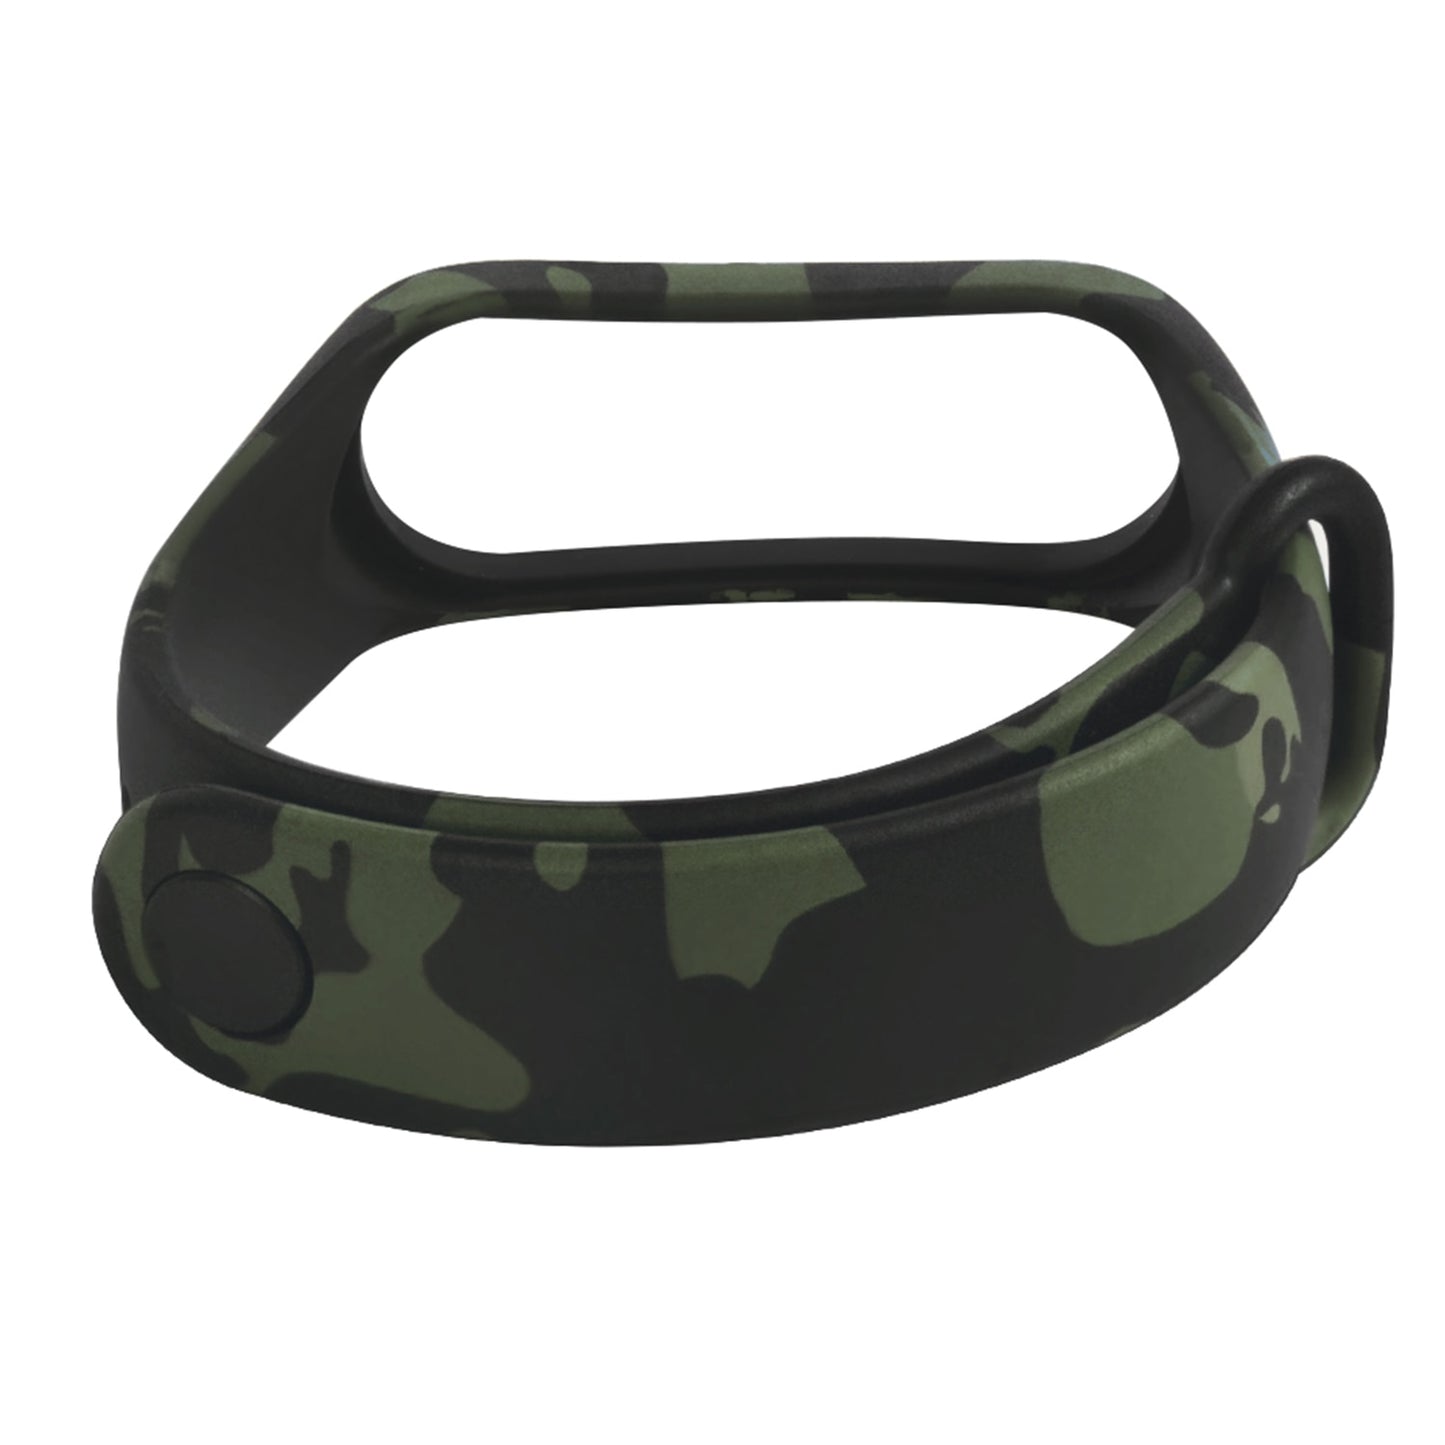 Epaal Mi Band 4 / Mi Band 3 - Camouflage Pattern Replacement Silicone Strap